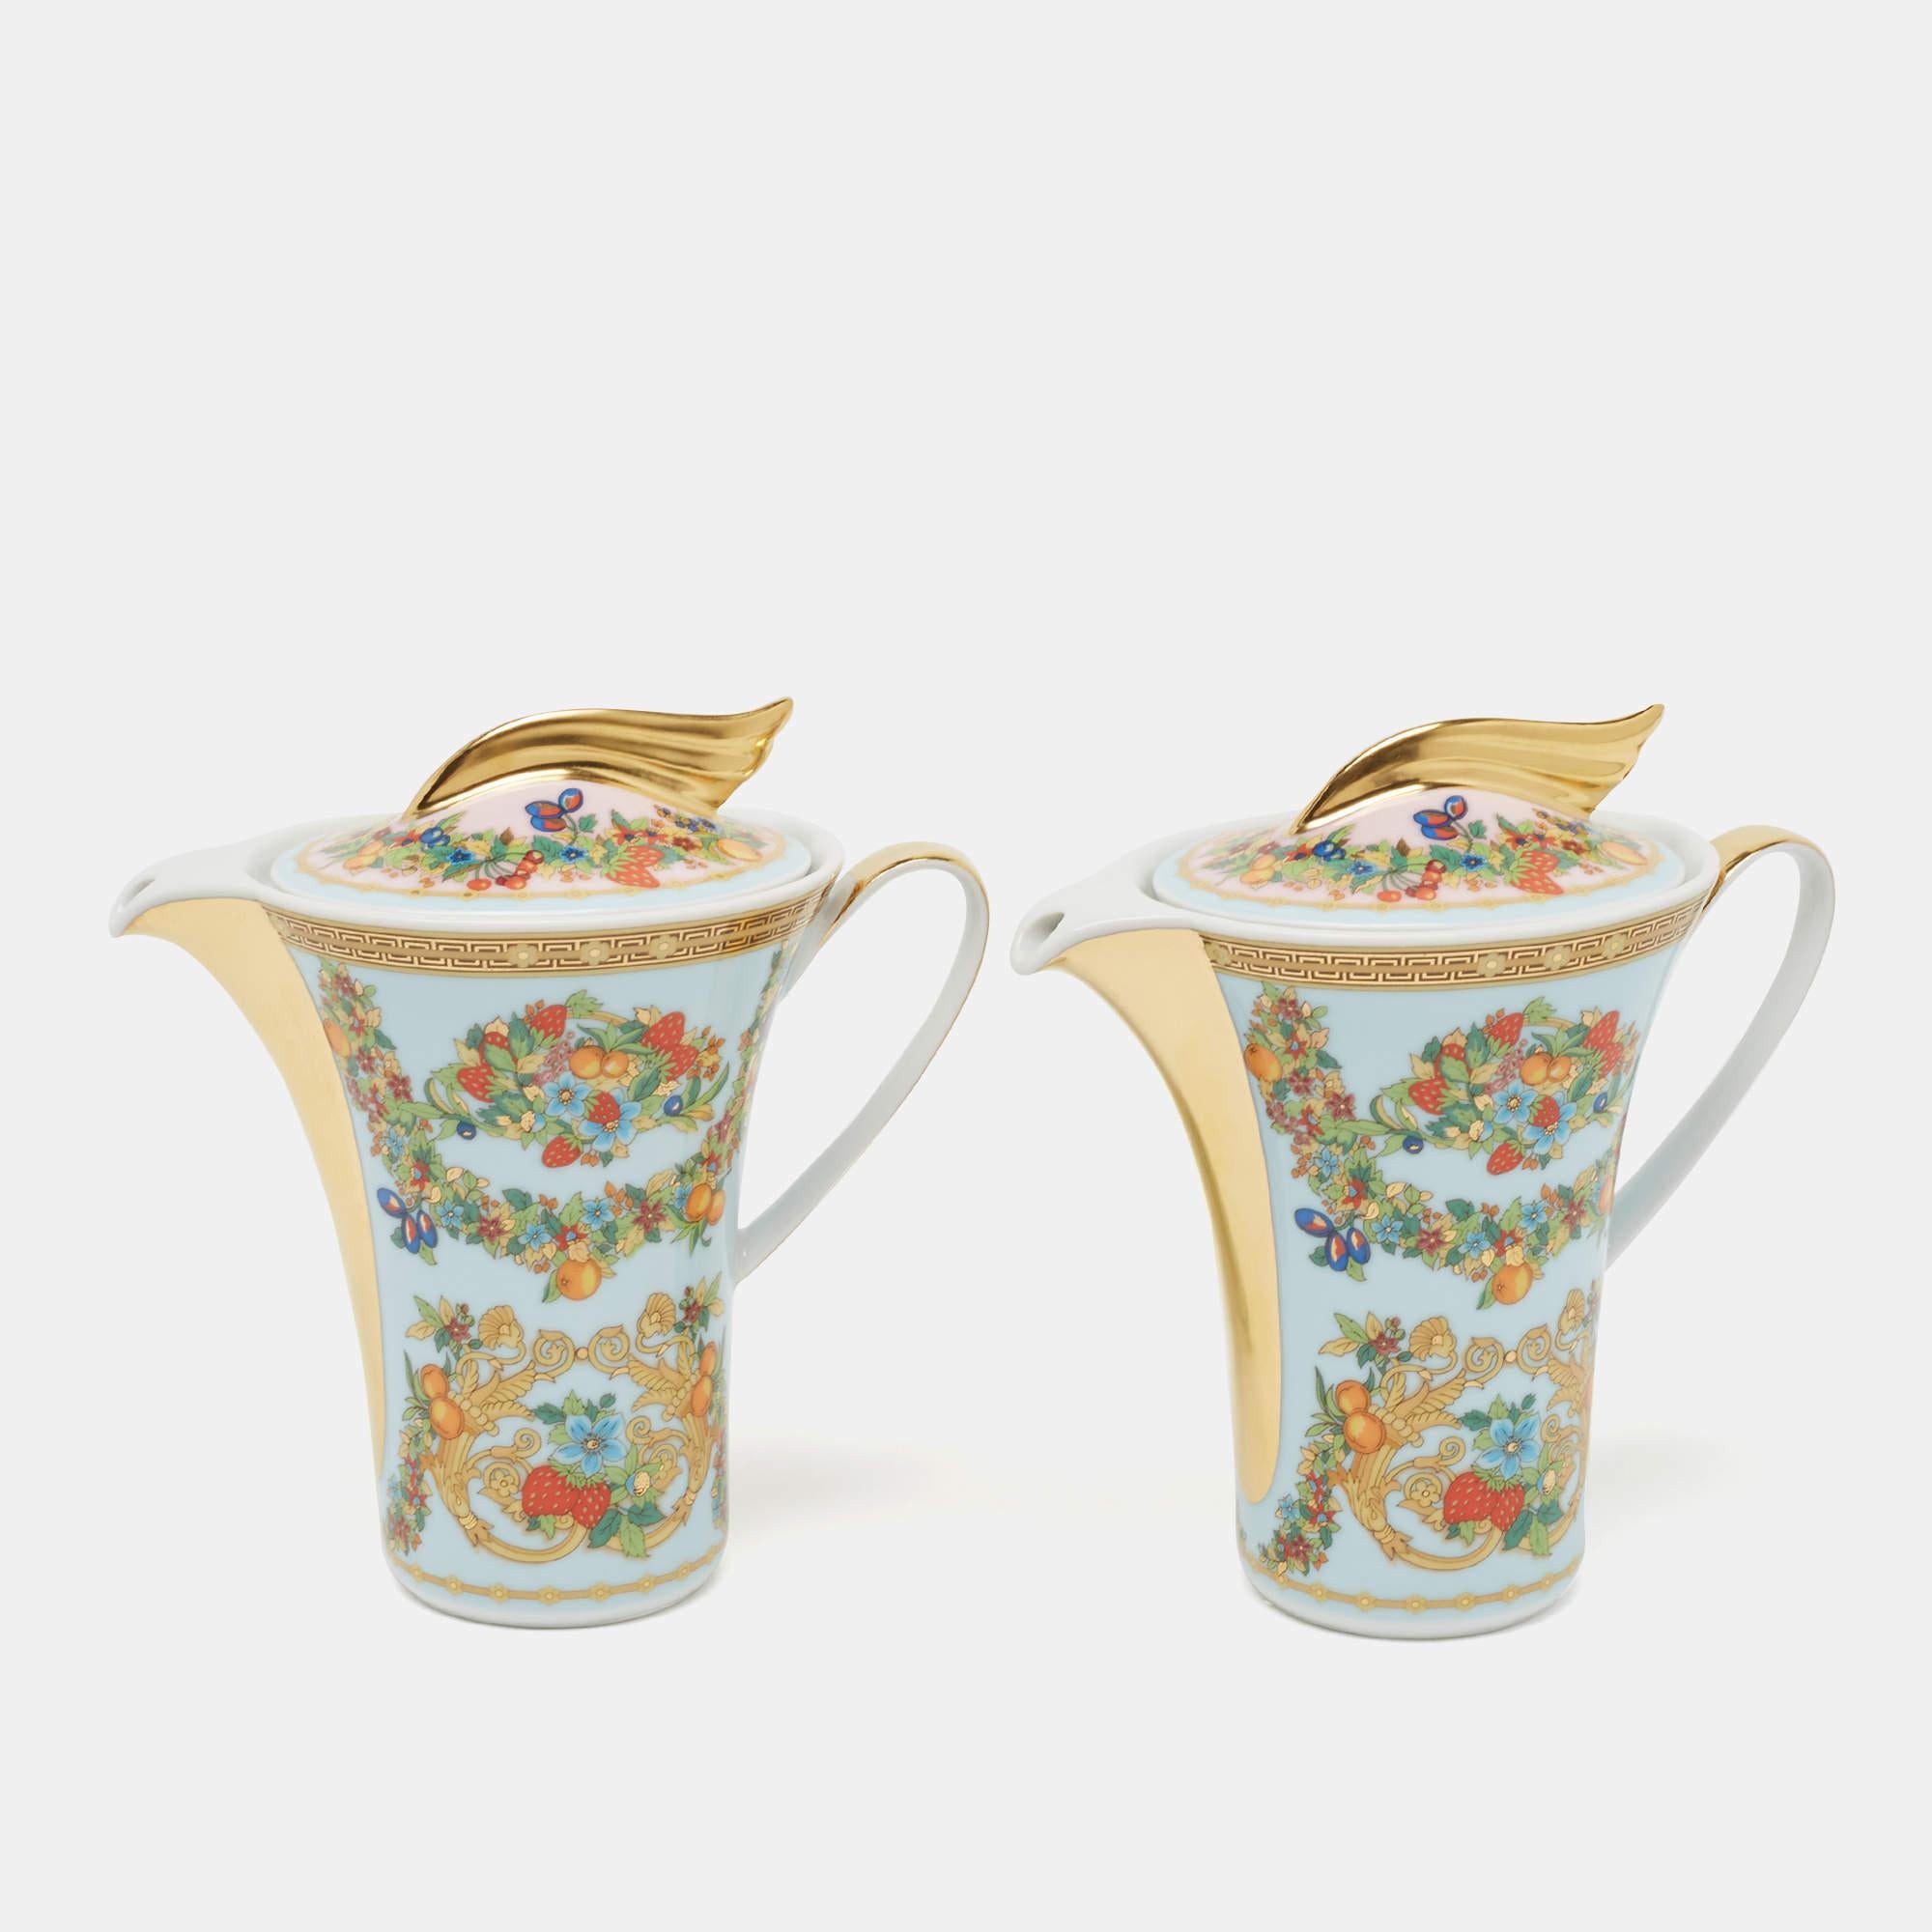 The Rosenthal Meets Versace creamer set is an exquisite and elegant tableware ensemble. Crafted with precision, each creamer is made of porcelain and adorned with intricate motifs, infusing luxury and charm into every pour.

